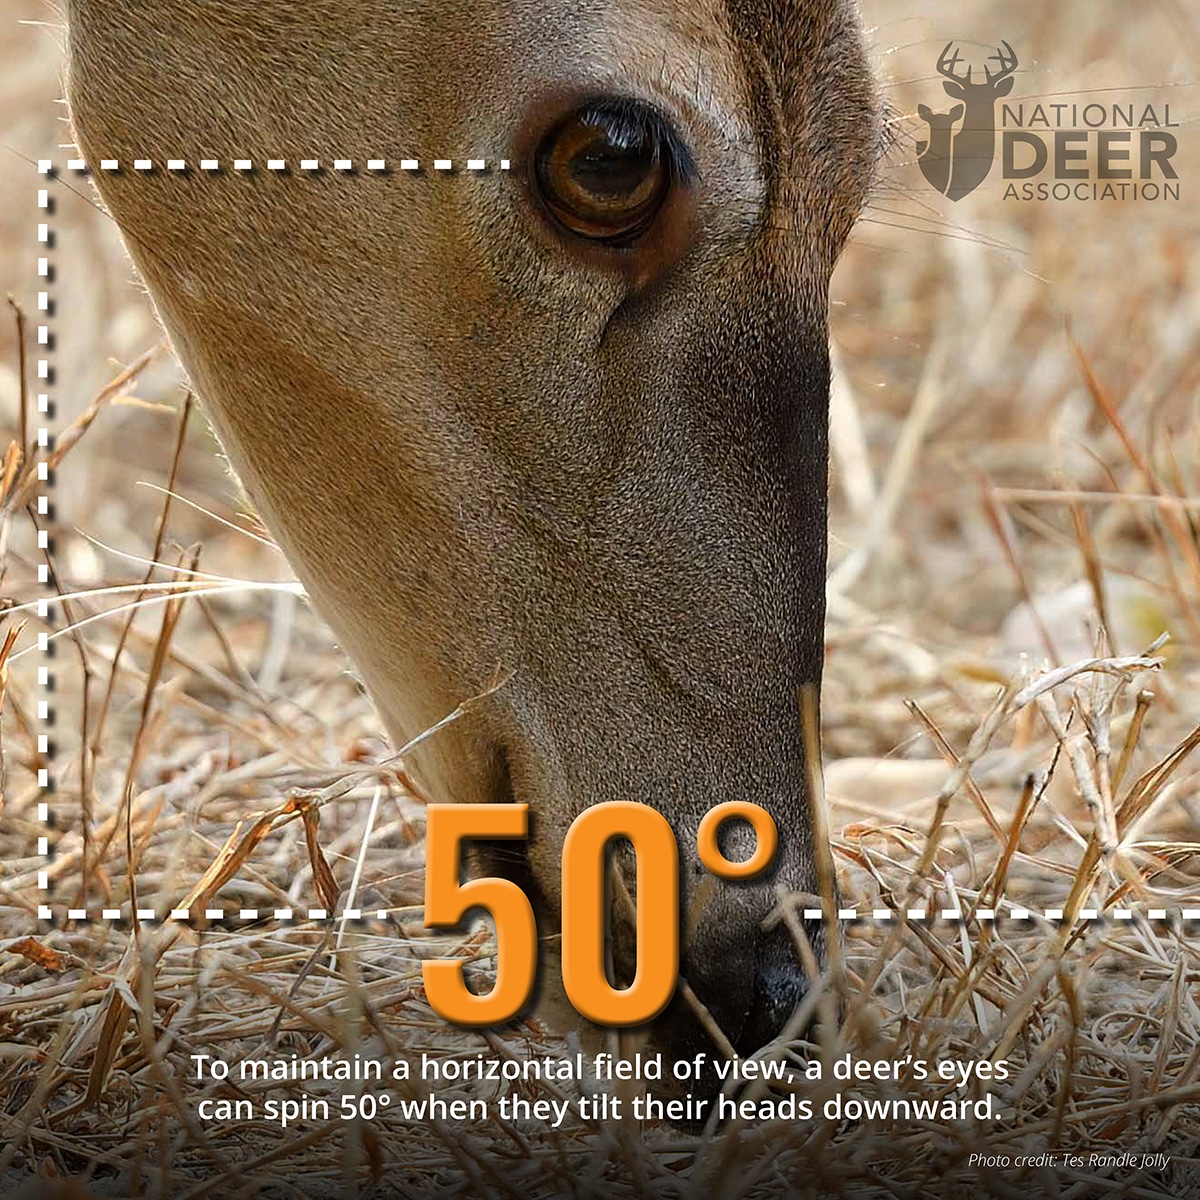 50 degree spin deer vision 7 Facts About Deer Vision Hunters Should See